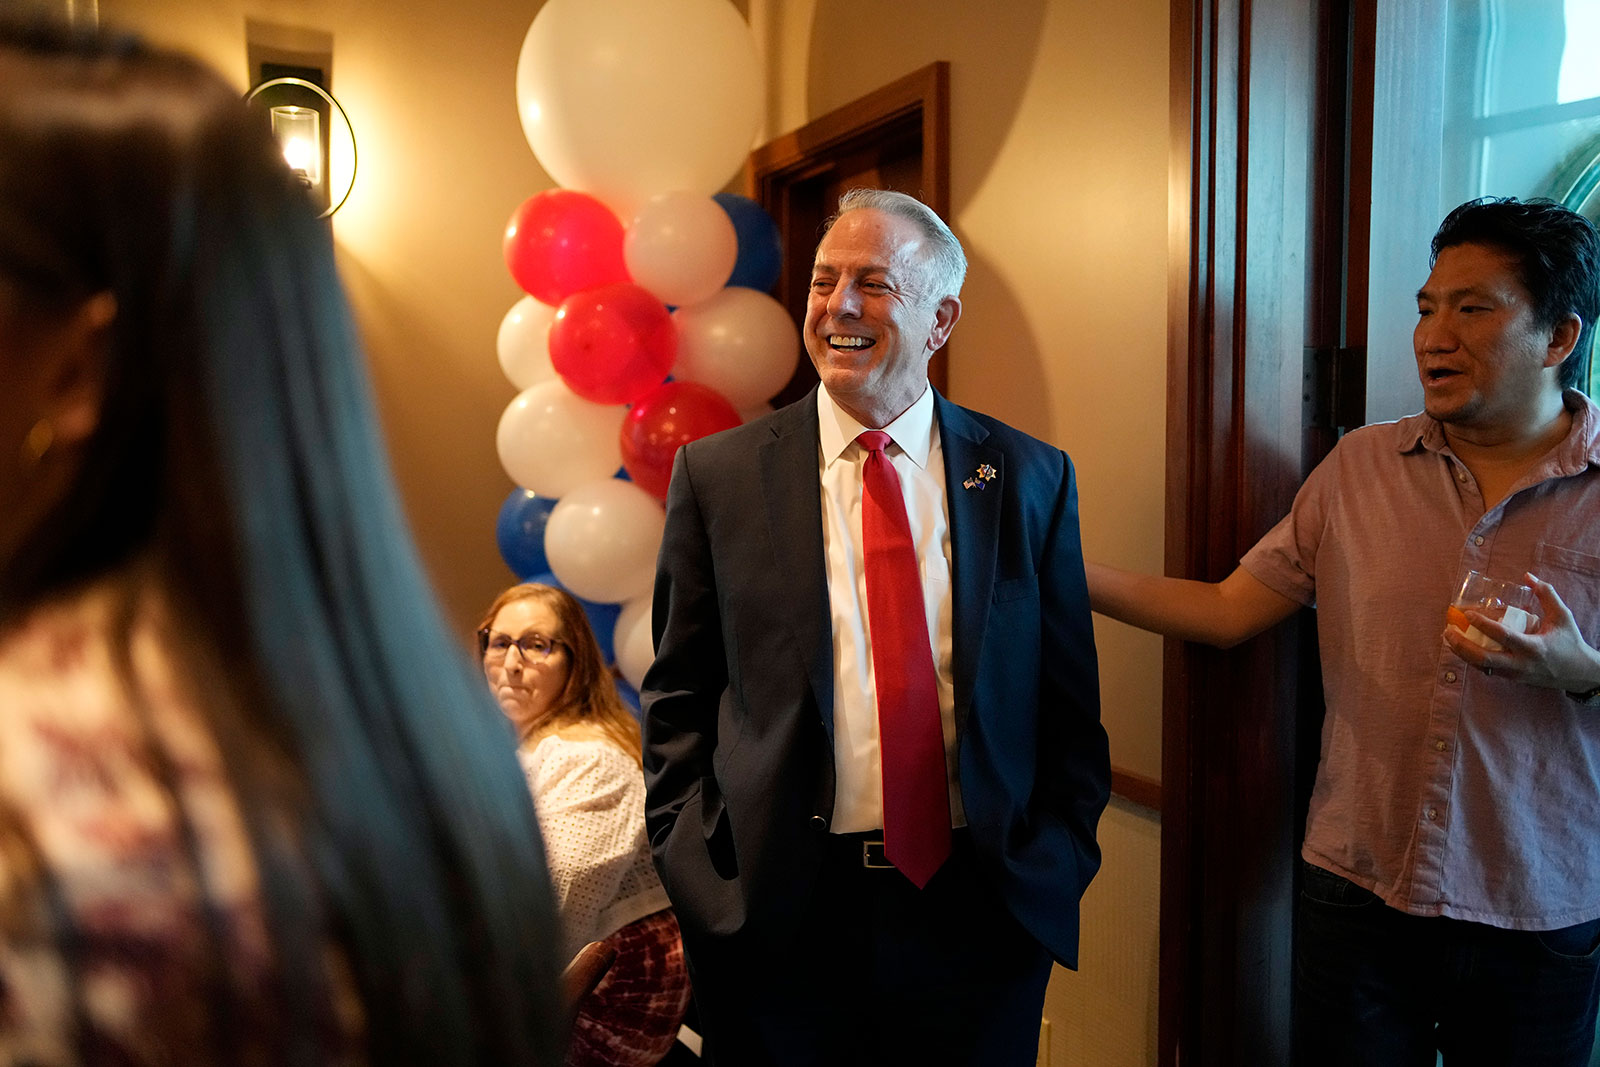 Clark County Sheriff and Republican candidate for Nevada governor Joe Lombardo, center, meets with supporters at an election night party on June 14 in Las Vegas, Nevada. 